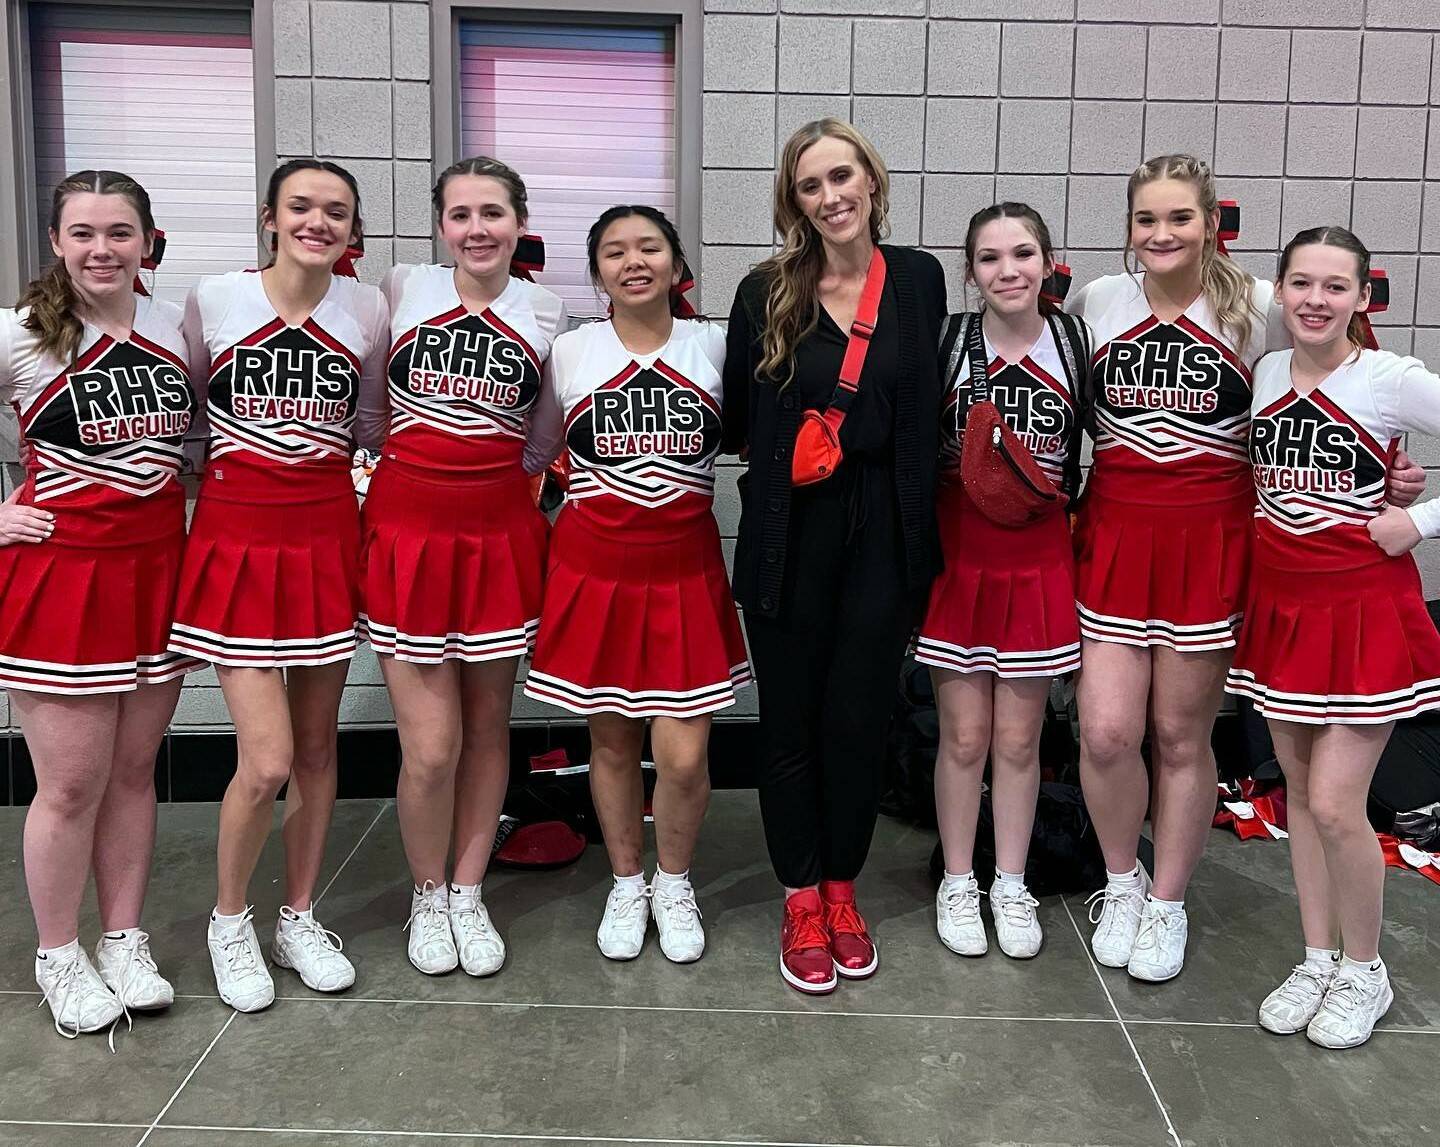 With $10,000 being granted to the Raymond High School Cheerleaders (pictured) by the Bill Belichick Foundation, the plan is to invest the funds into new cheer mats and promote youth cheer within the school district. (RHS Cheer)